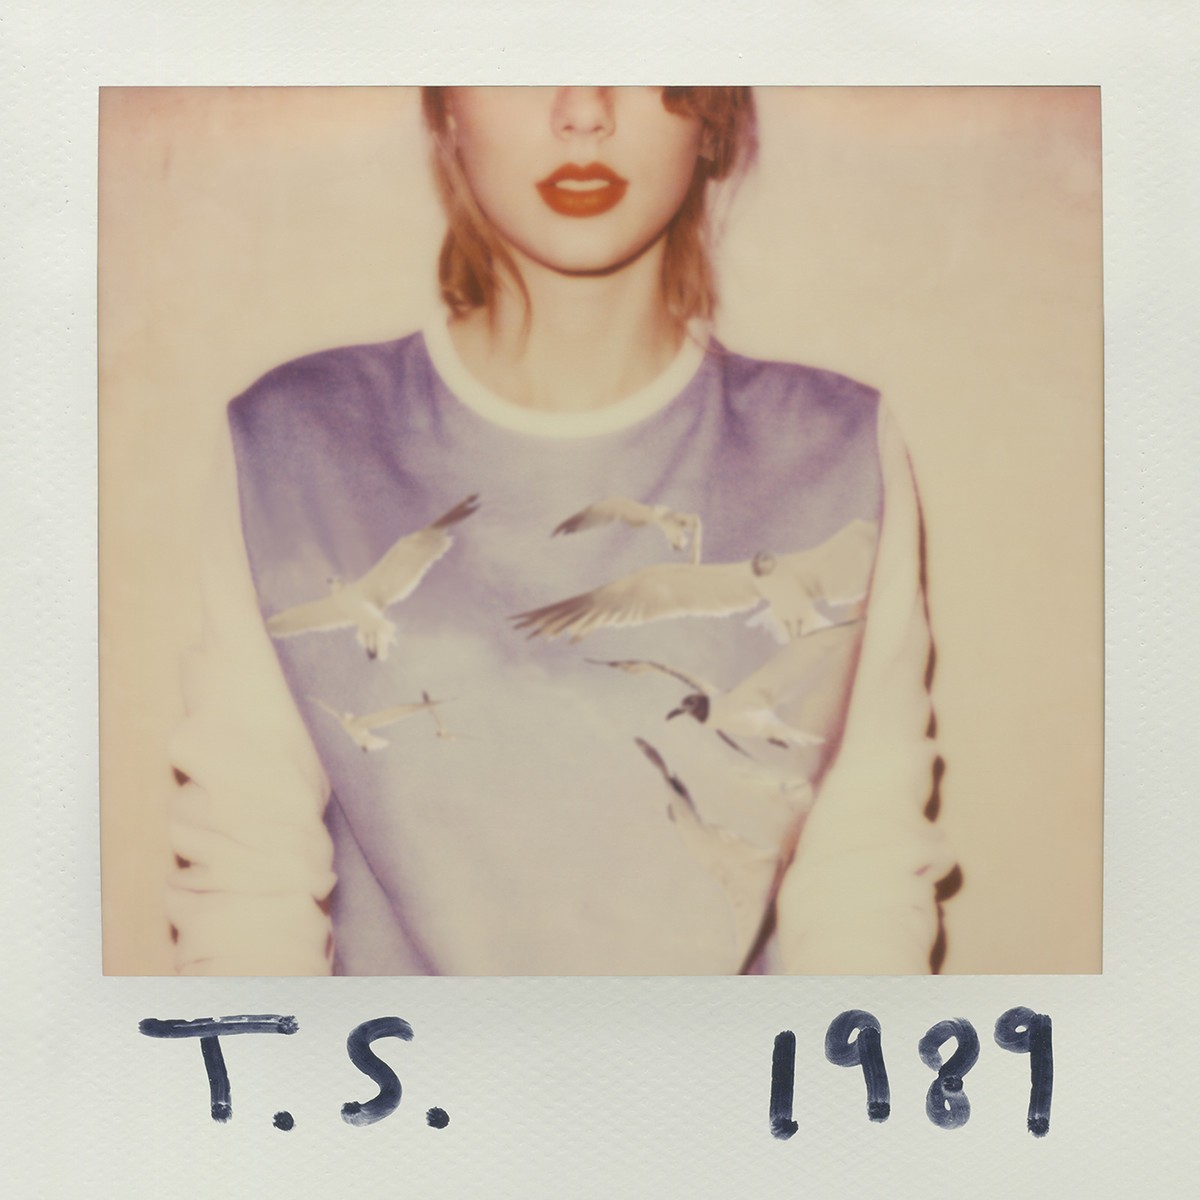 "1989" by Taylor Swift album cover